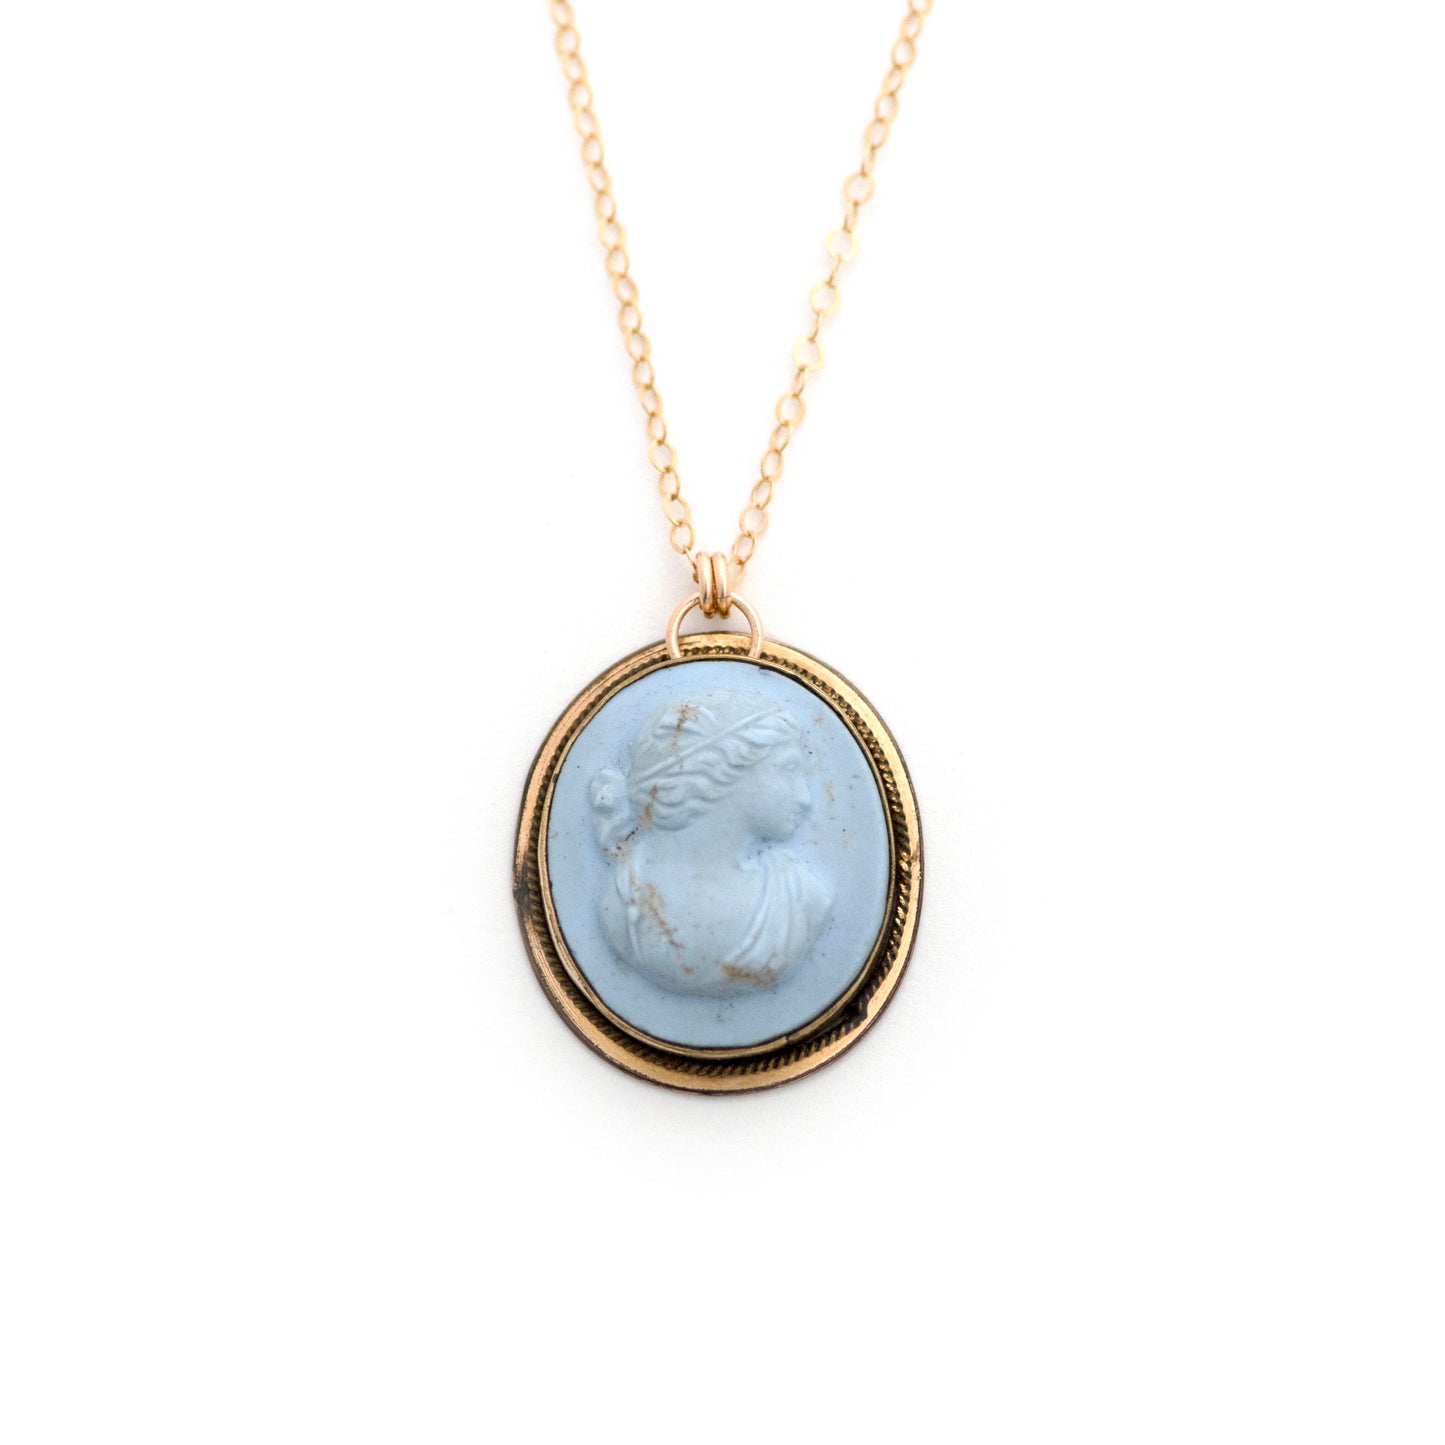 This antique conversion necklace is made up of:  Gold filled Victorian cuff link from the late 1800s with a pale blue porcelain cameo on a 14k gold filled chain.